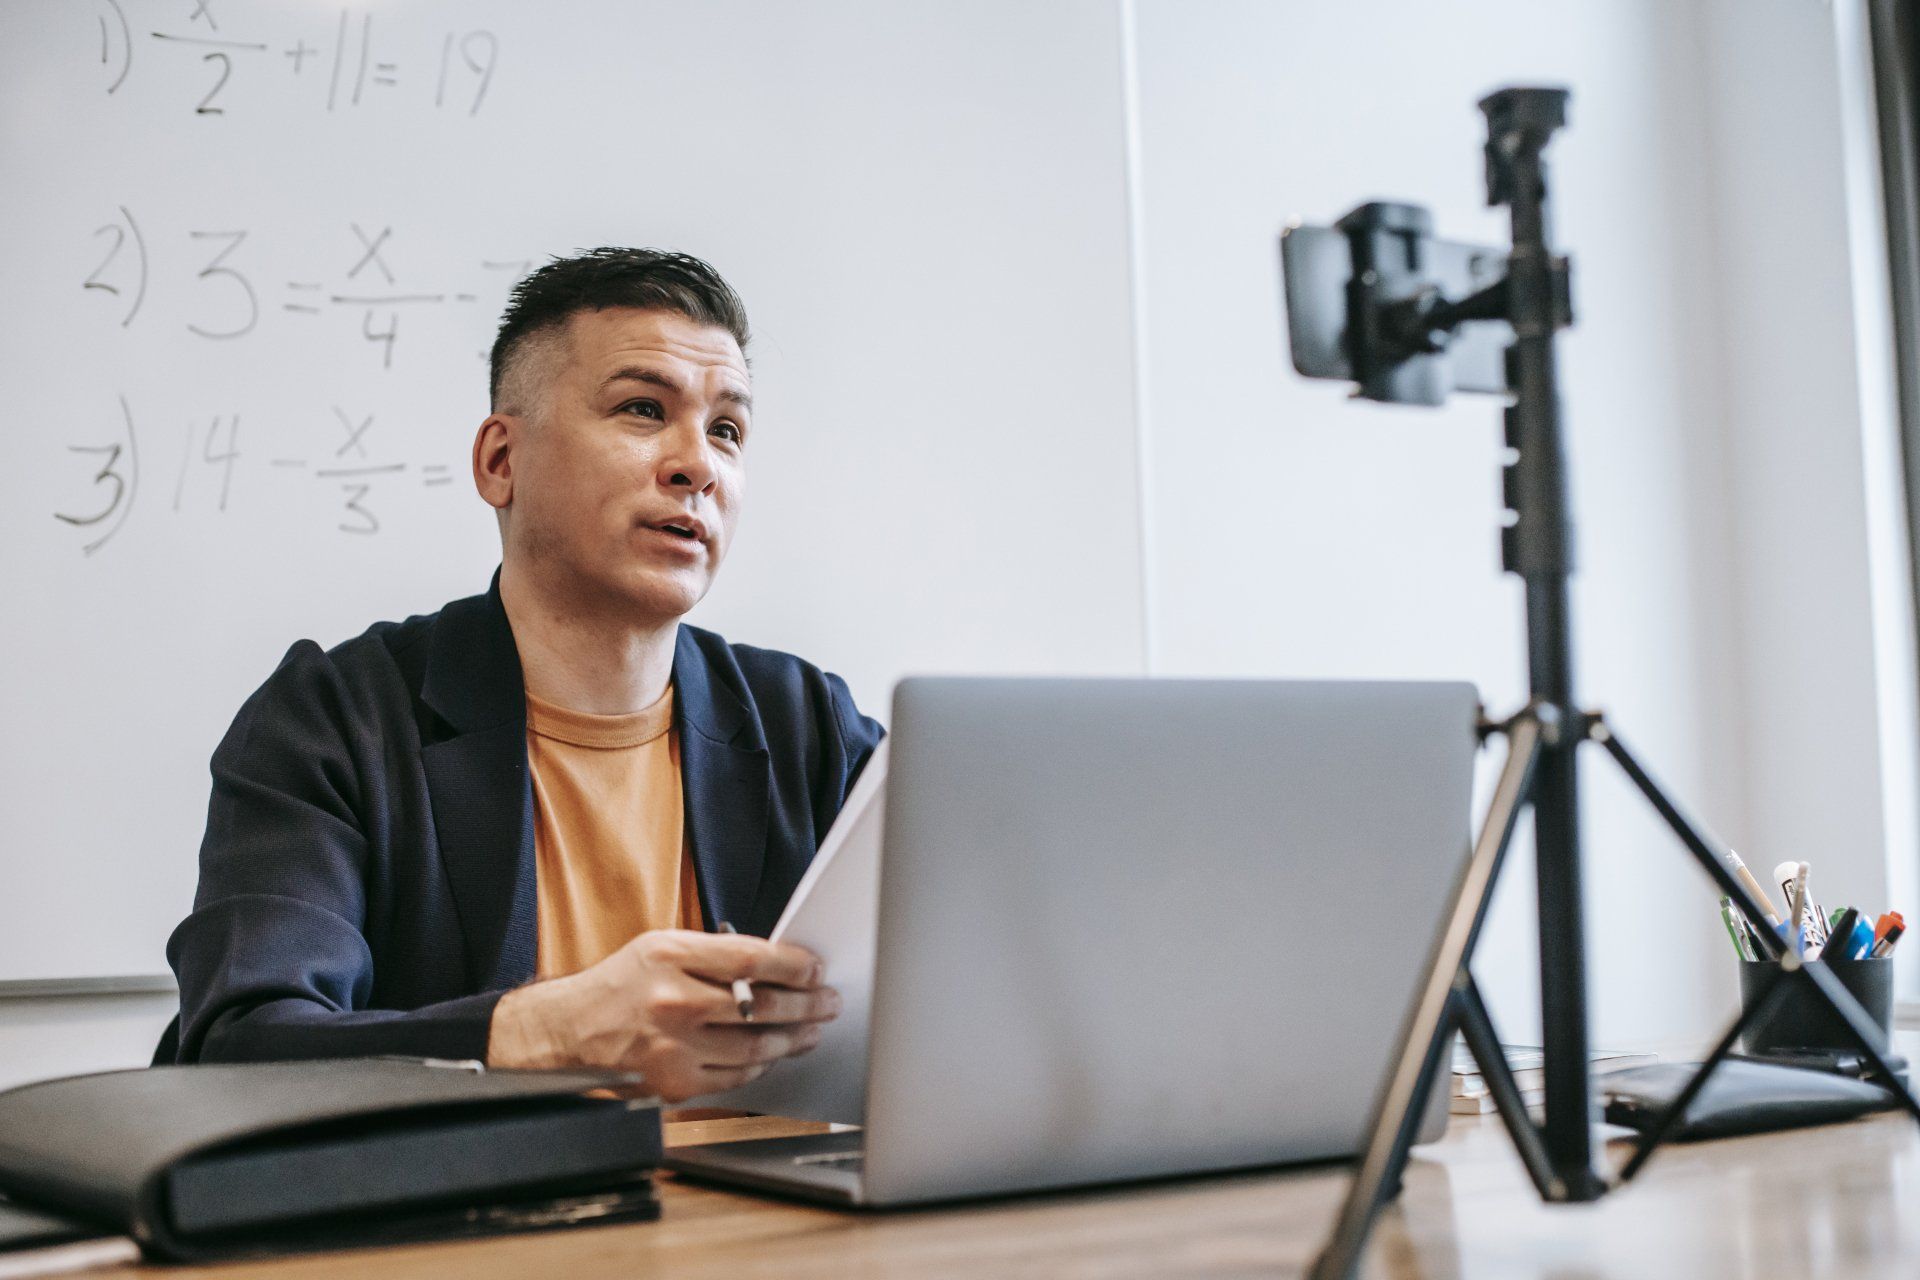 A professor sitting in front of a whiteboard talking to a camera during a virtual event